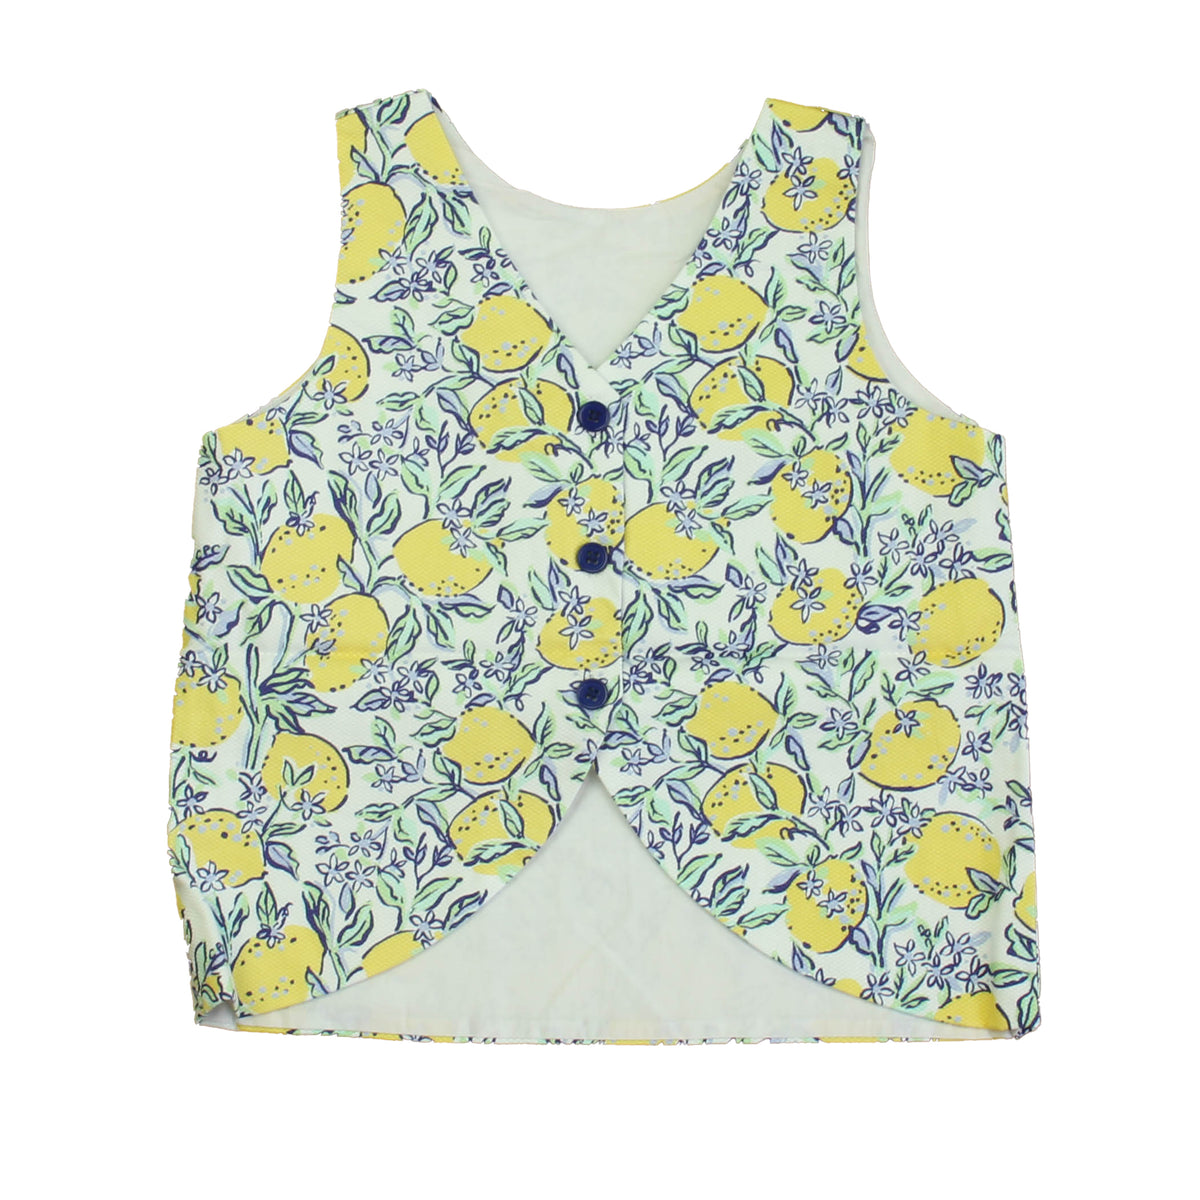 New with Tags: Lemonade Stand Top -- FINAL SALE